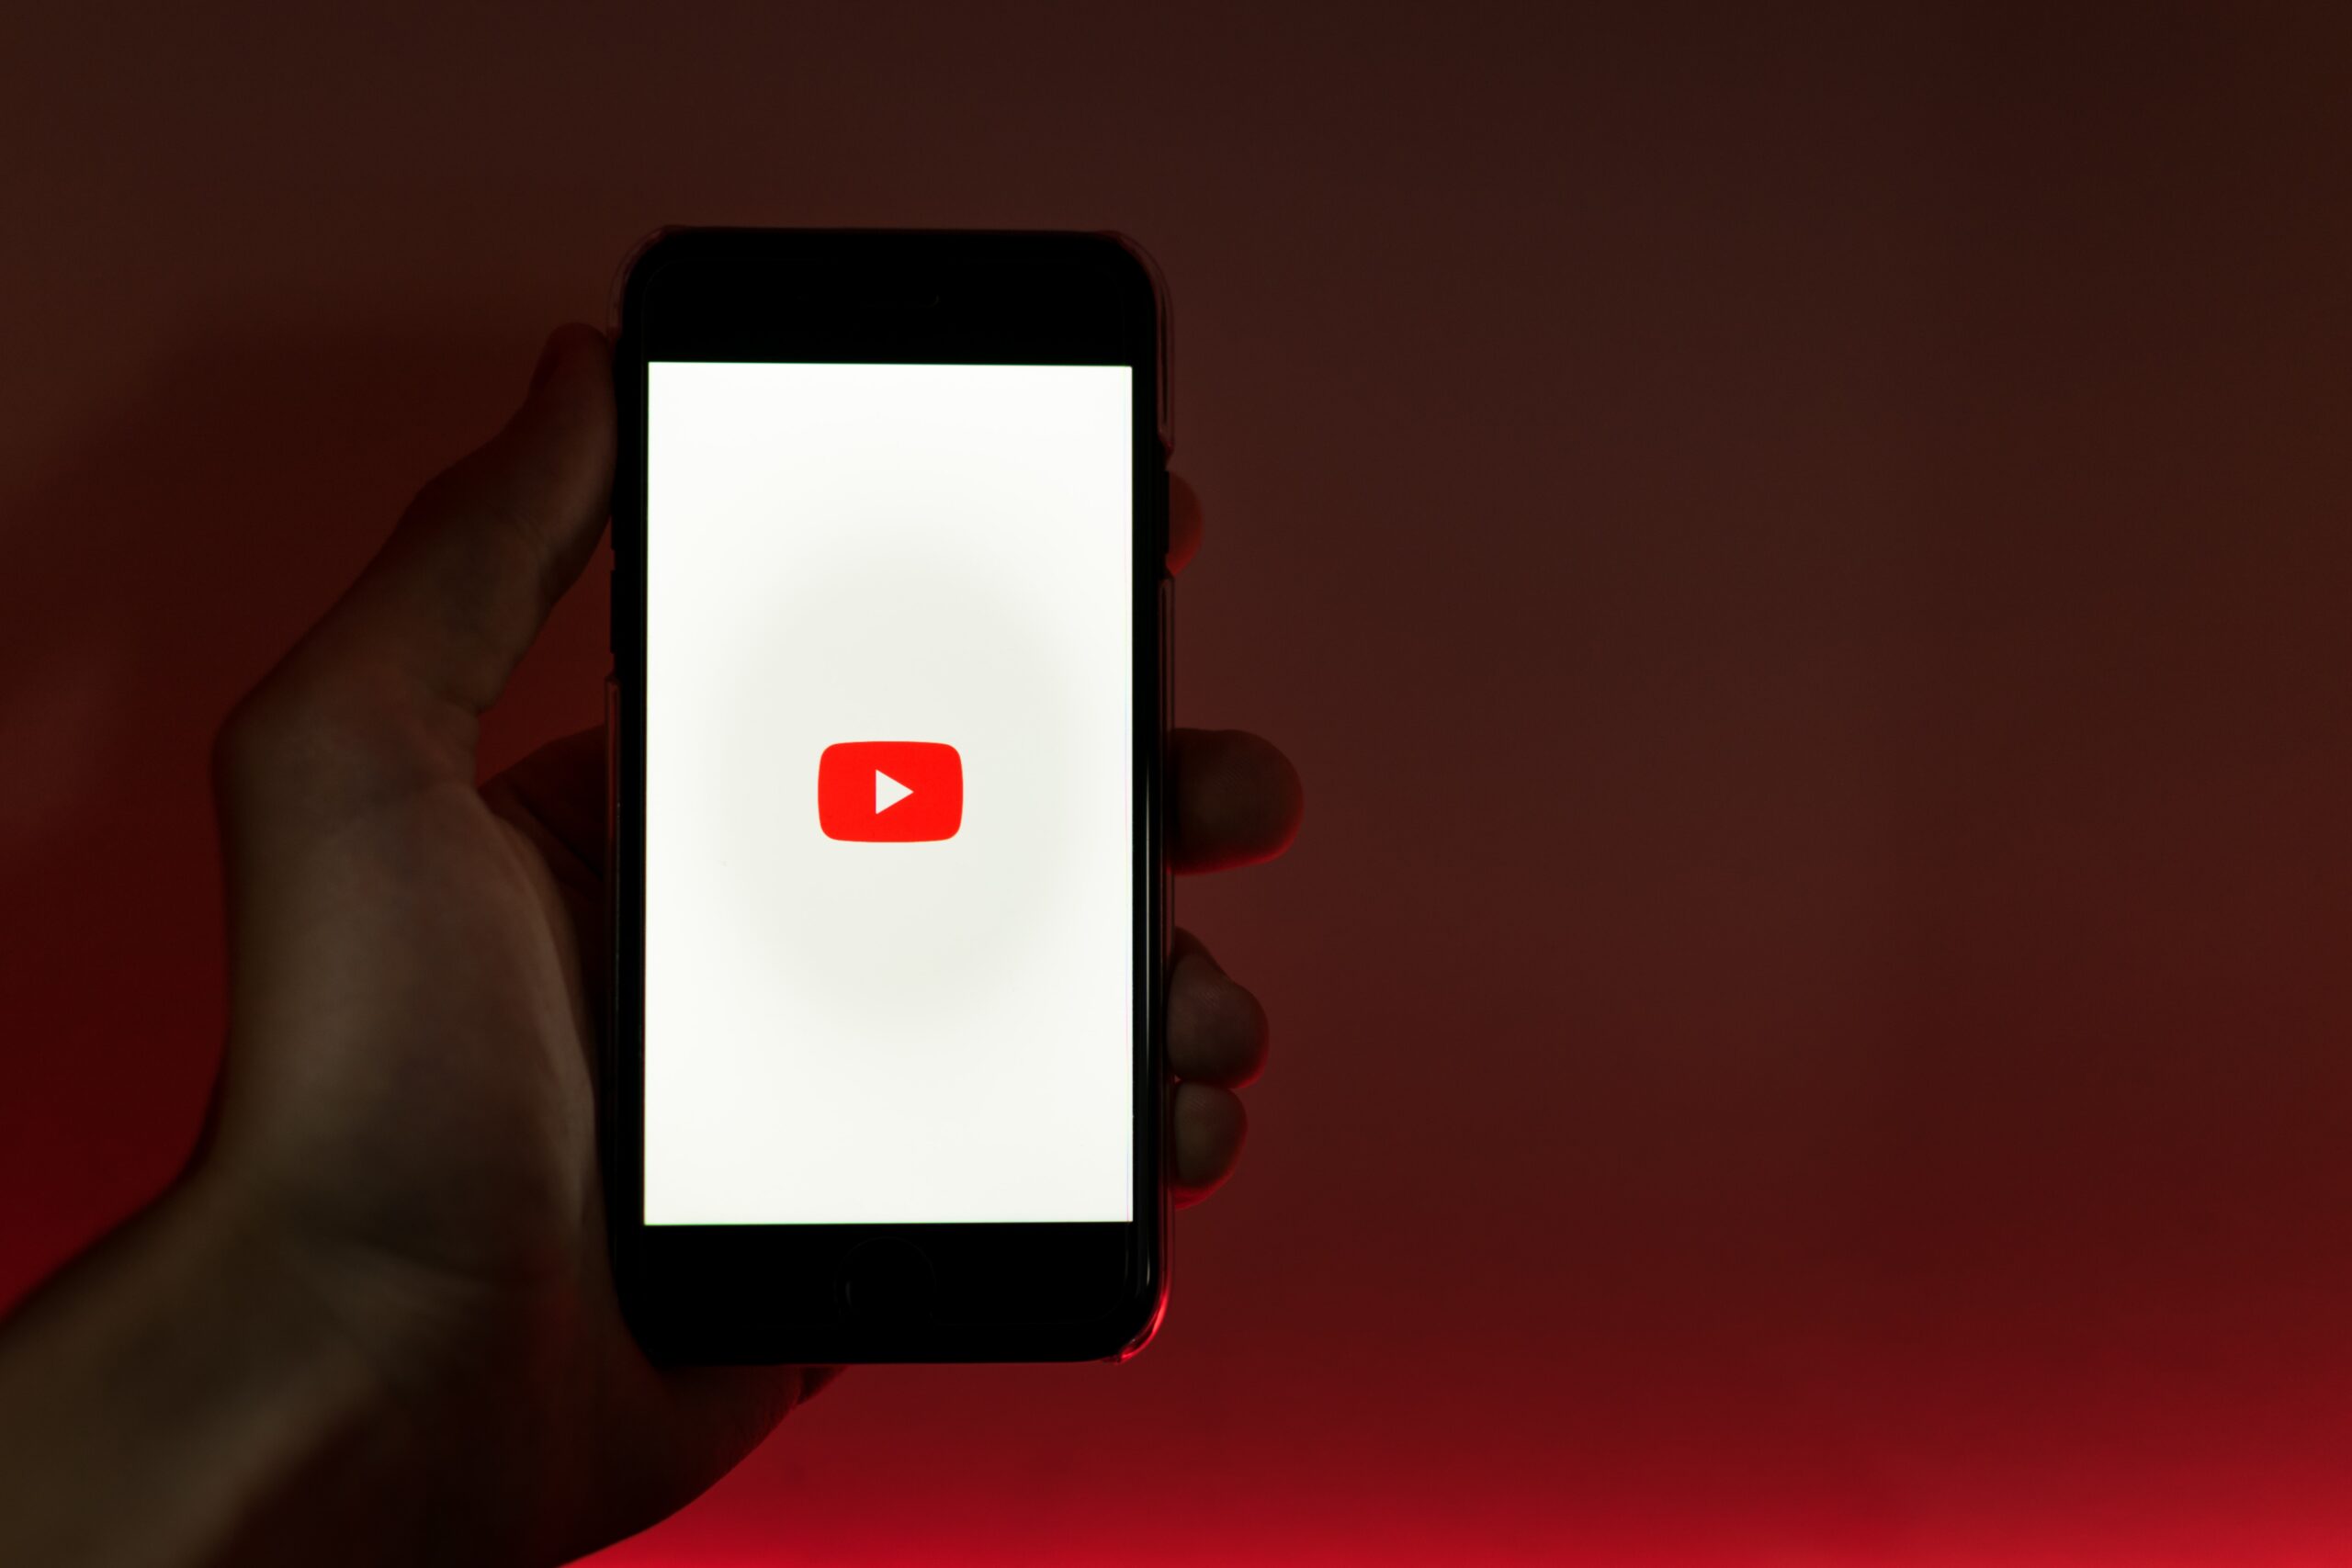 YouTube on mobile phone